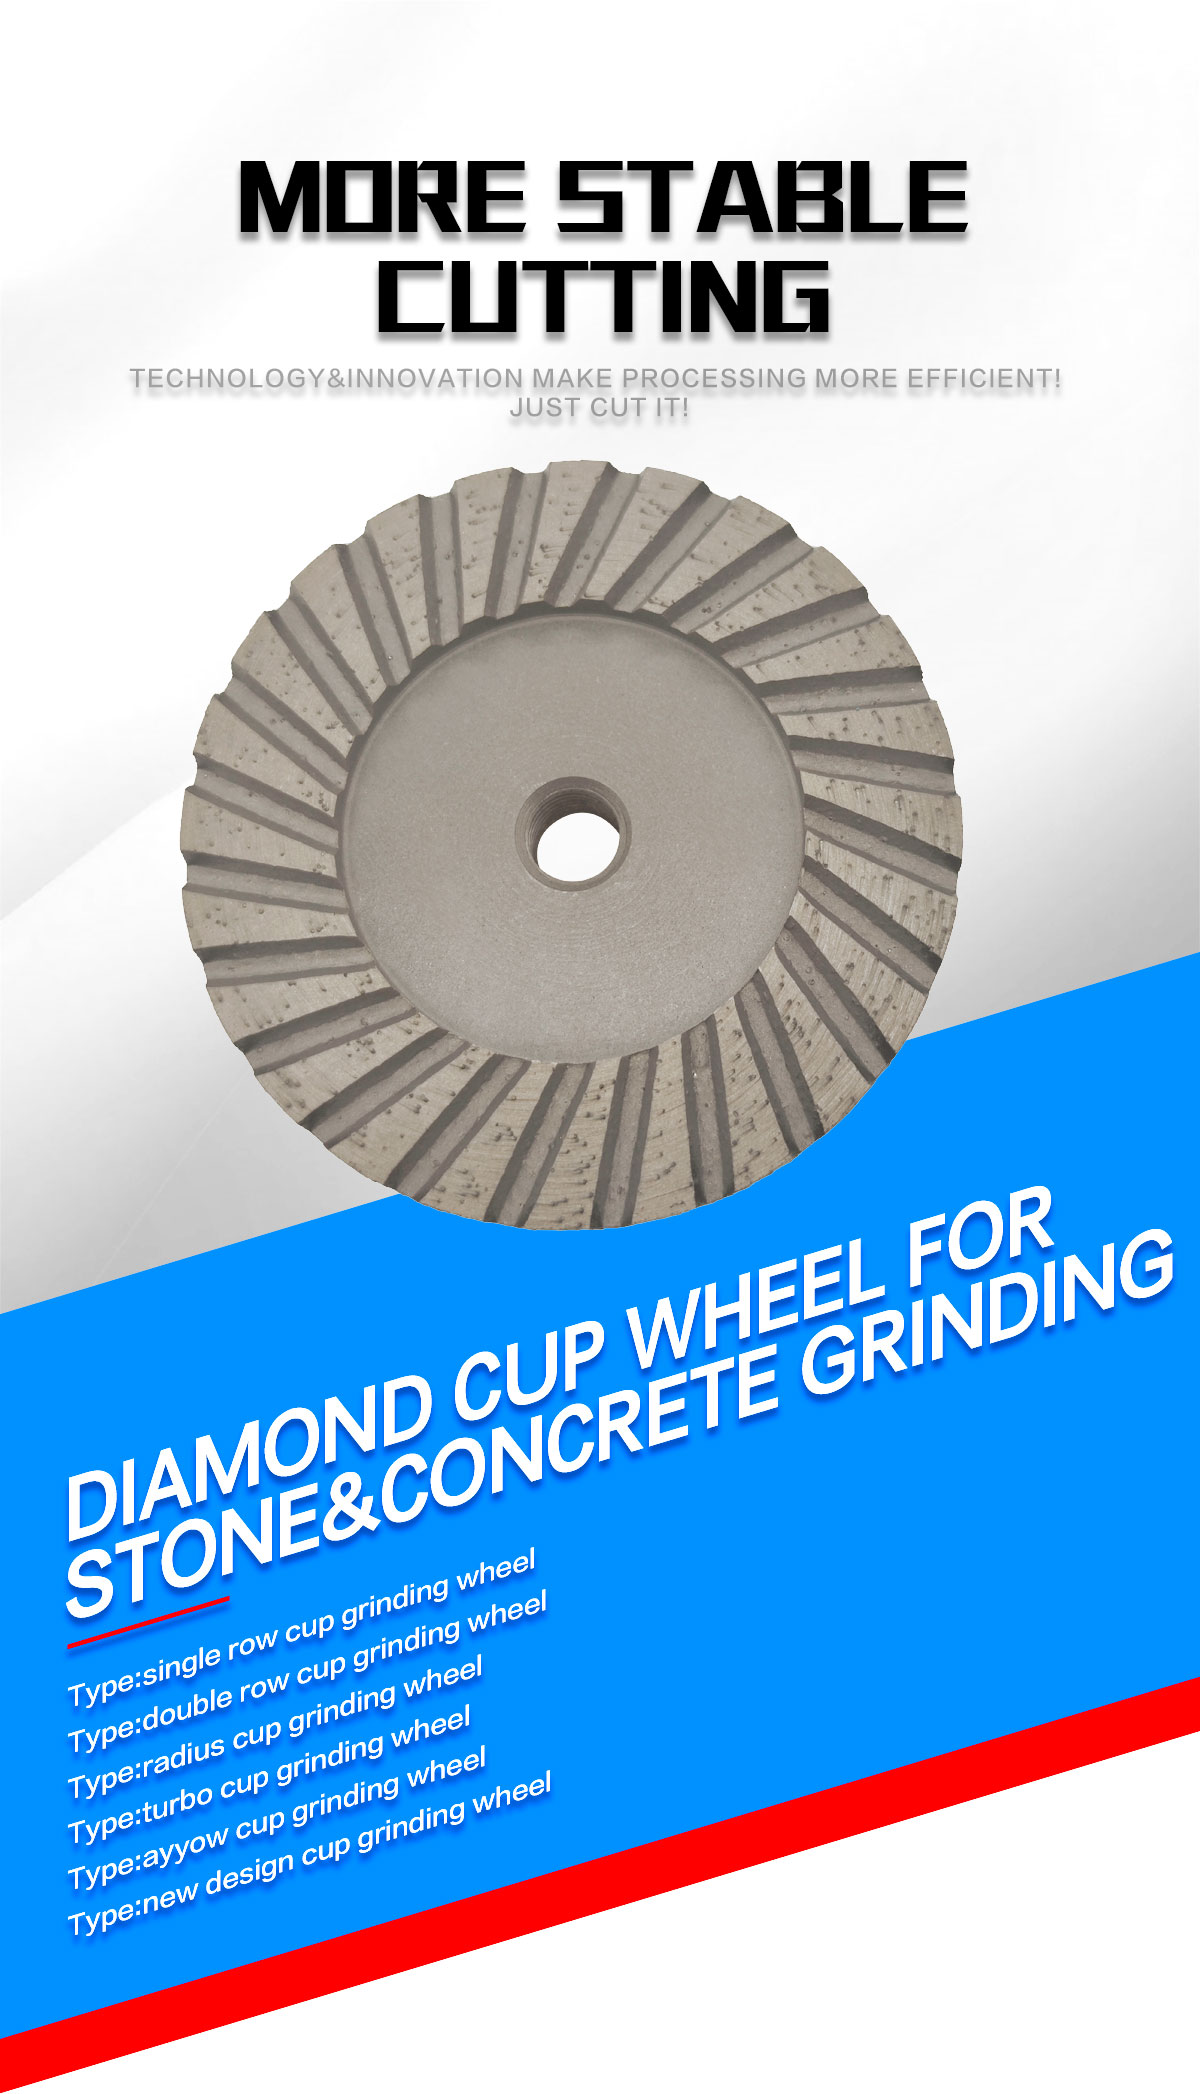 Diamond cup grinding wheel for stone